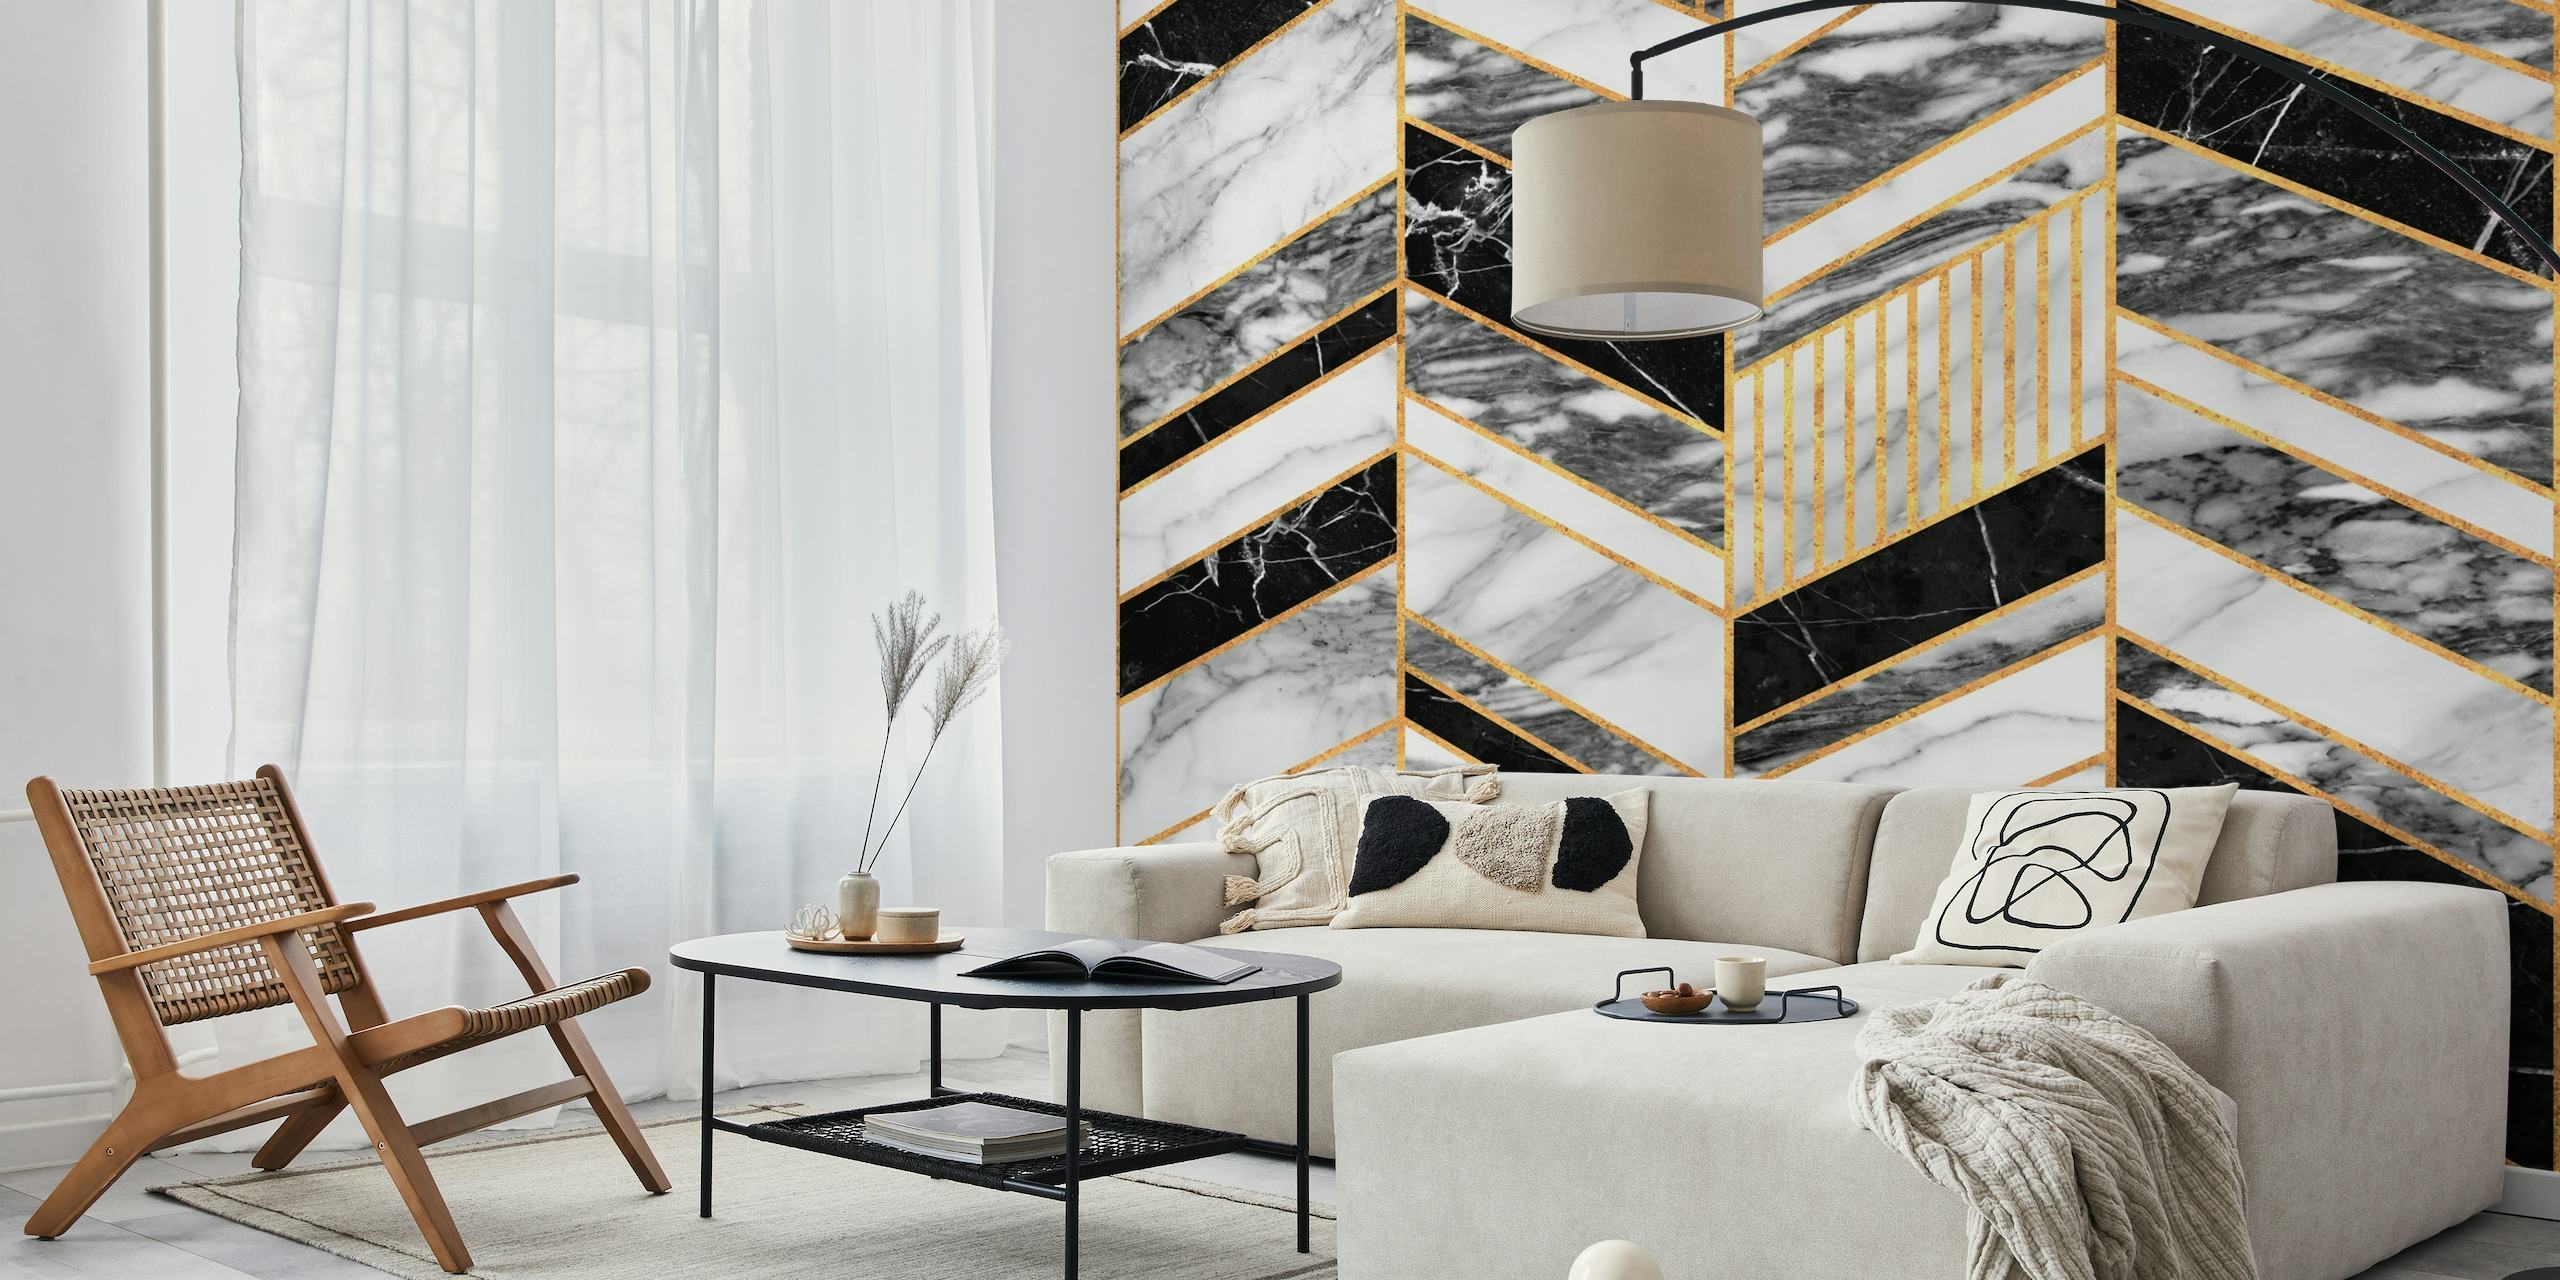 Chevron marble pattern wall mural with gold accents